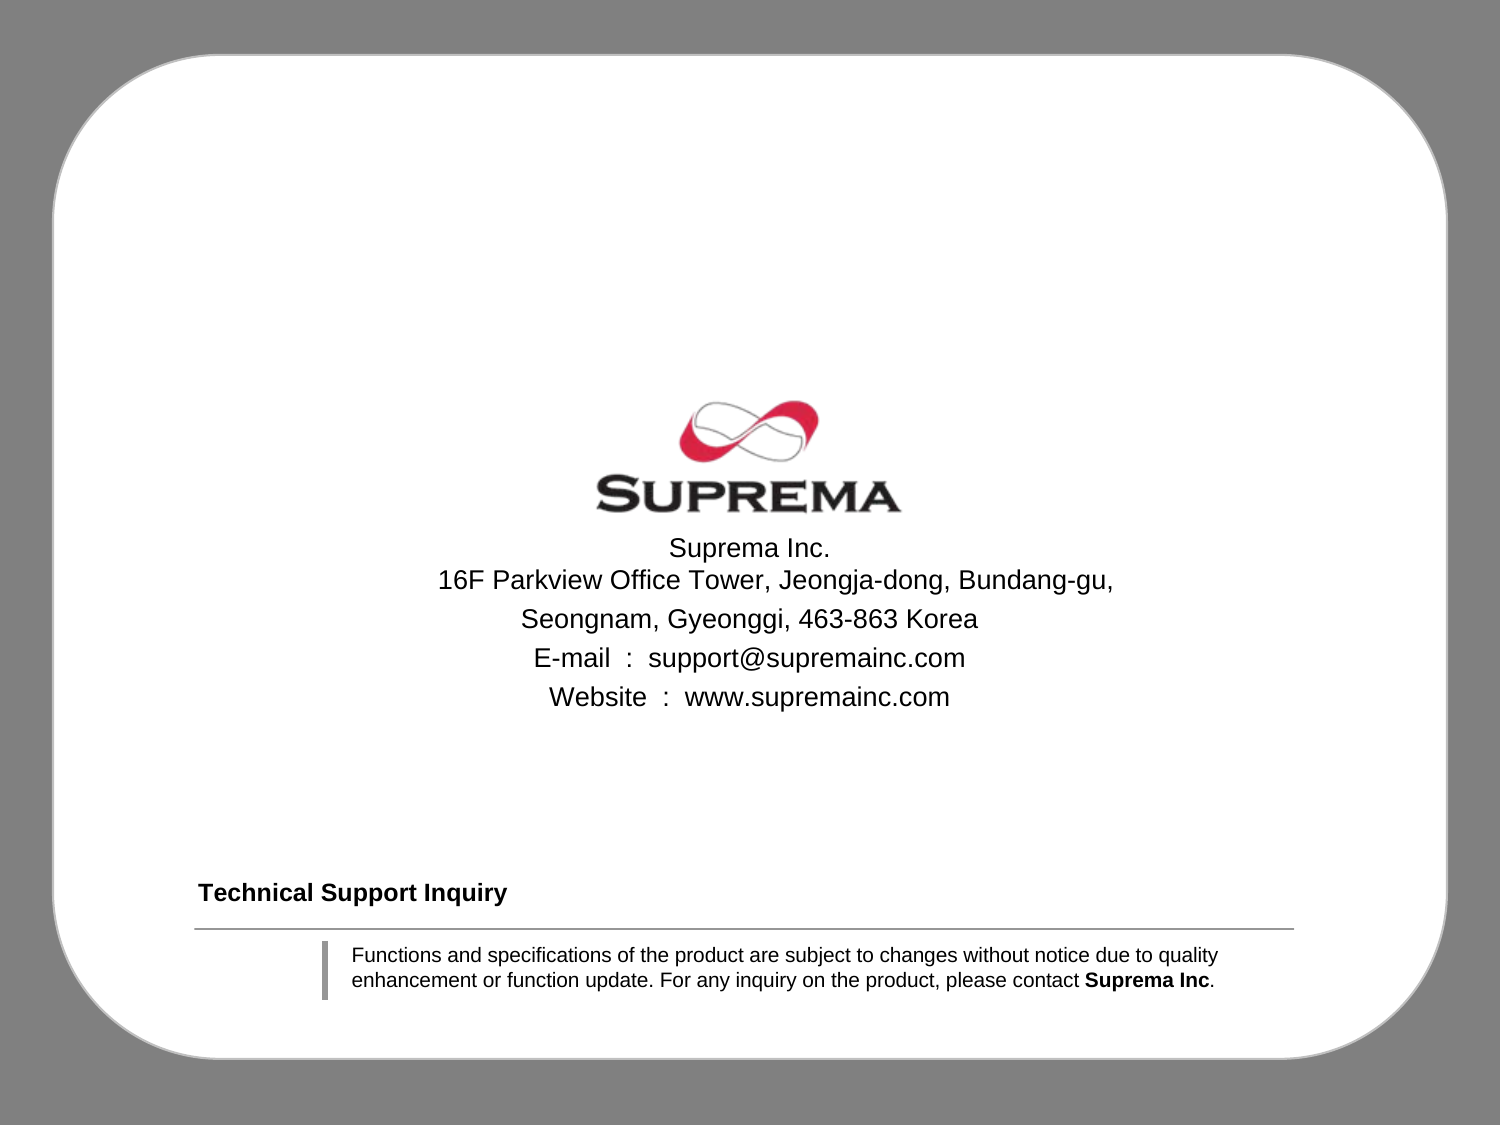 Technical Support InquirySuprema Inc.16F Parkview Office Tower, Jeongja-dong, Bundang-gu, Seongnam, Gyeonggi, 463-863 KoreaE-mail  :  support@supremainc.comWebsite  :  www.supremainc.comFunctions and specifications of the product are subject to changes without notice due to quality enhancement or function update. For any inquiry on the product, please contact Suprema Inc.